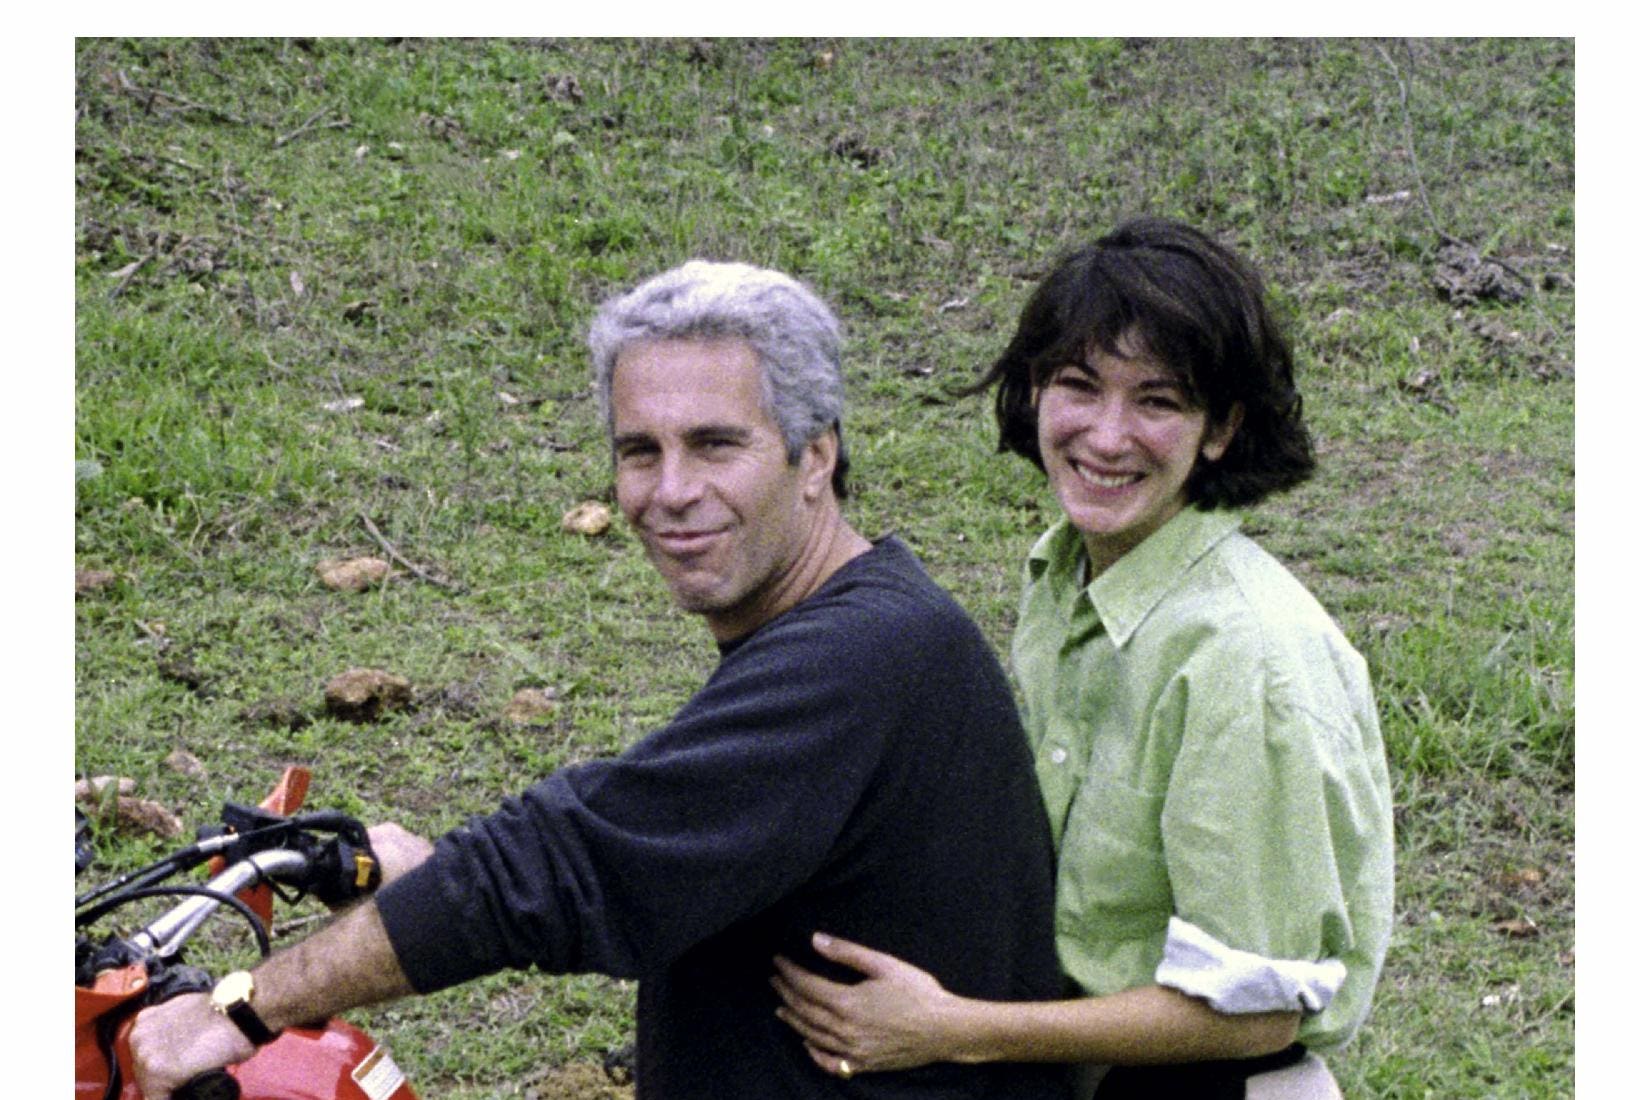 Ghislaine Maxwell’s lawyers said she should have been protected by a deal Jeffrey Epstein made years ago